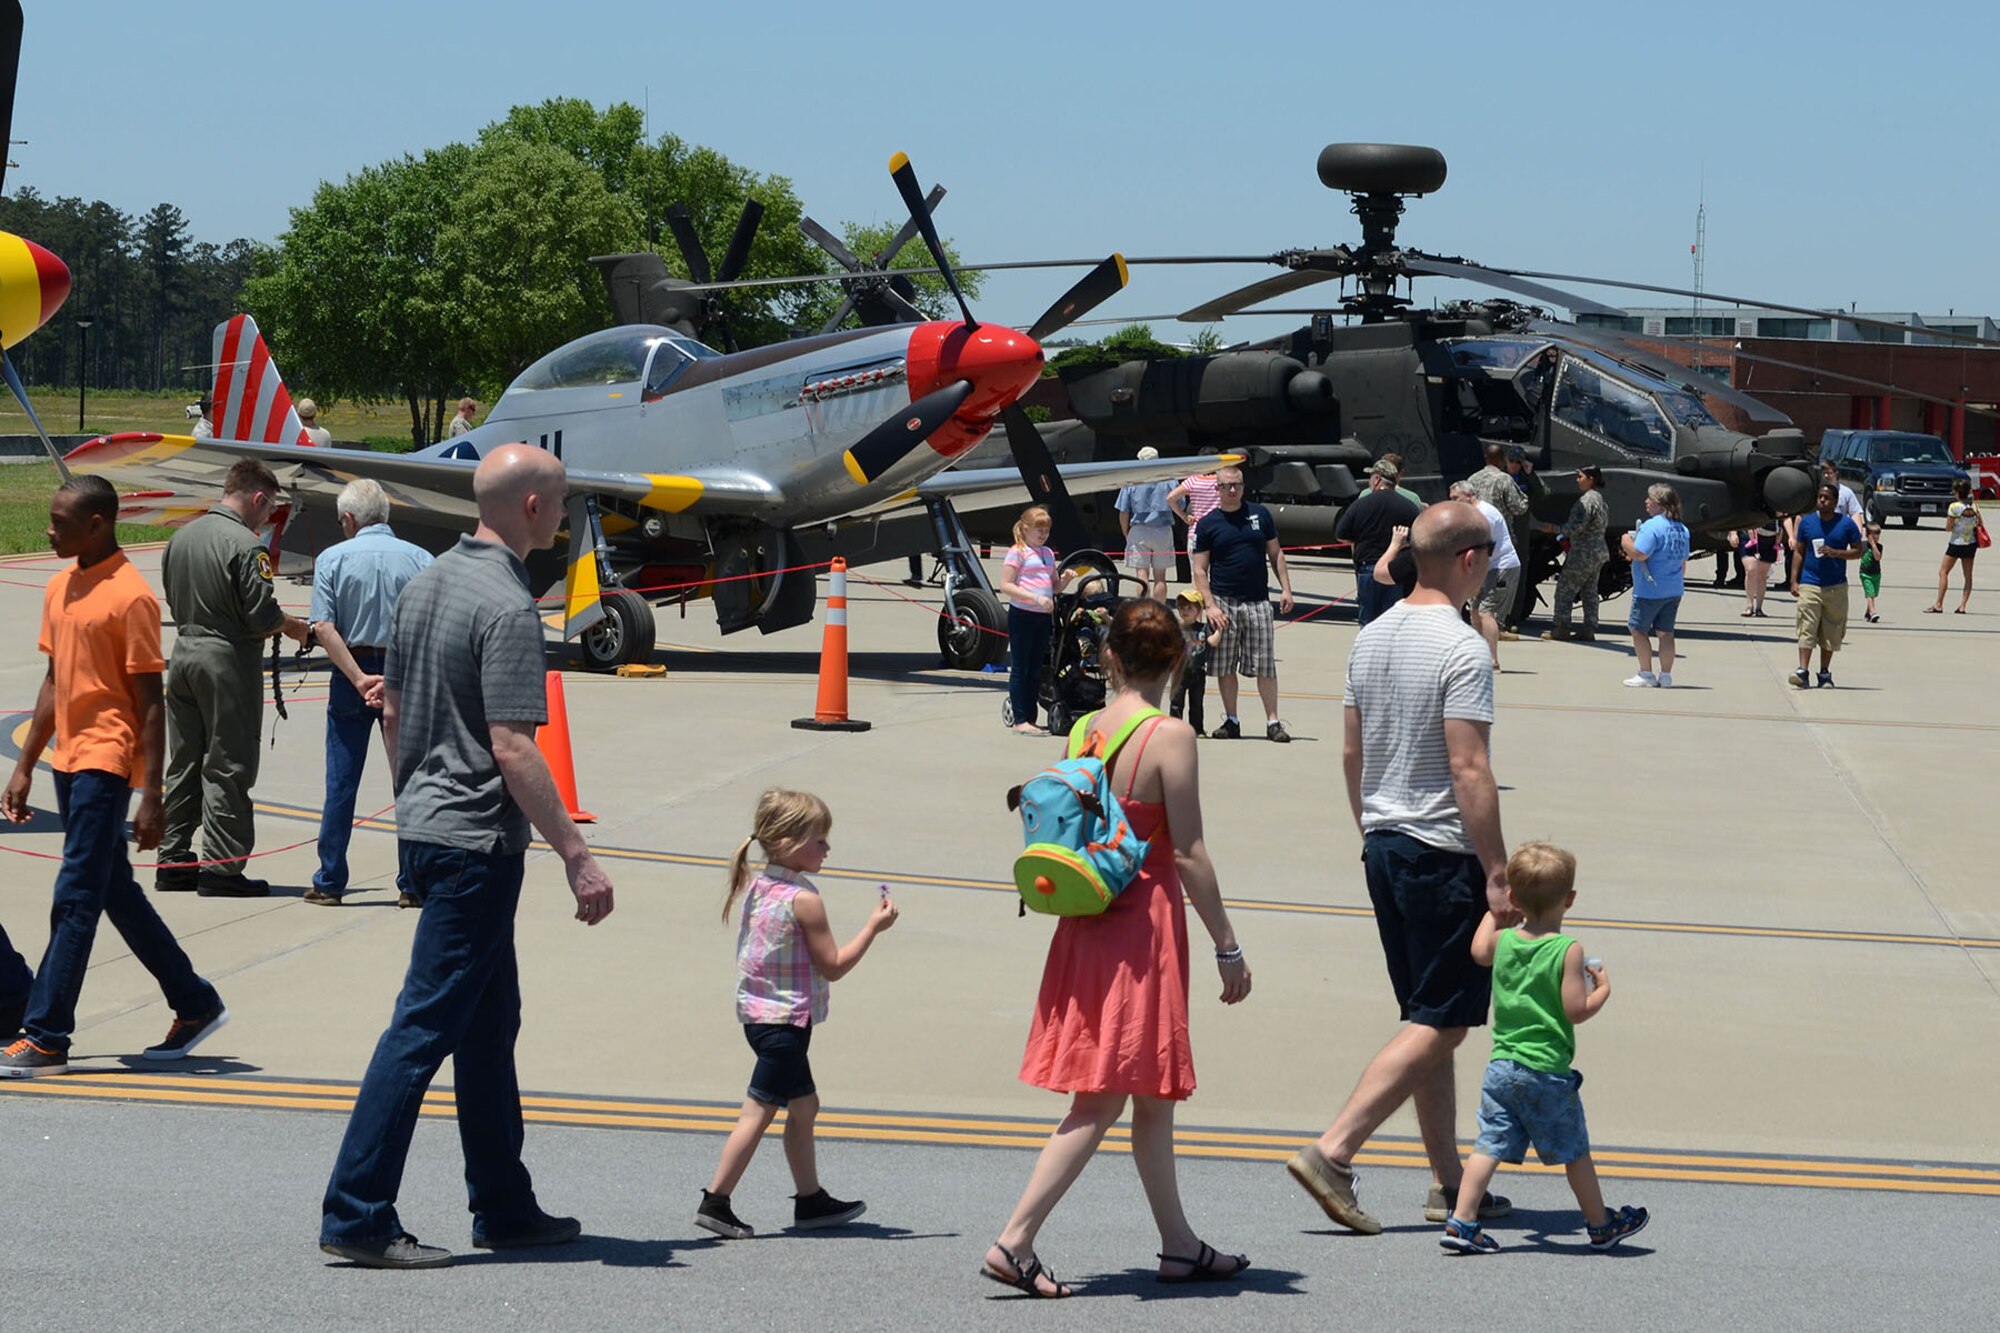 Swamp Fox Airmen and families gather during the 169th Fighter Wing Family Day for fun and fellowship at McEntire Joint National Guard Base, S.C., May 14, 2016. Local businesses and base support programs, provided food and event activities to show their appreciation for the continued service of South Carolina Air National Guard and 169th Fighter Wing families and Airmen. (U.S. Air National Guard photo by Senior Master Sgt. Edward Snyder)